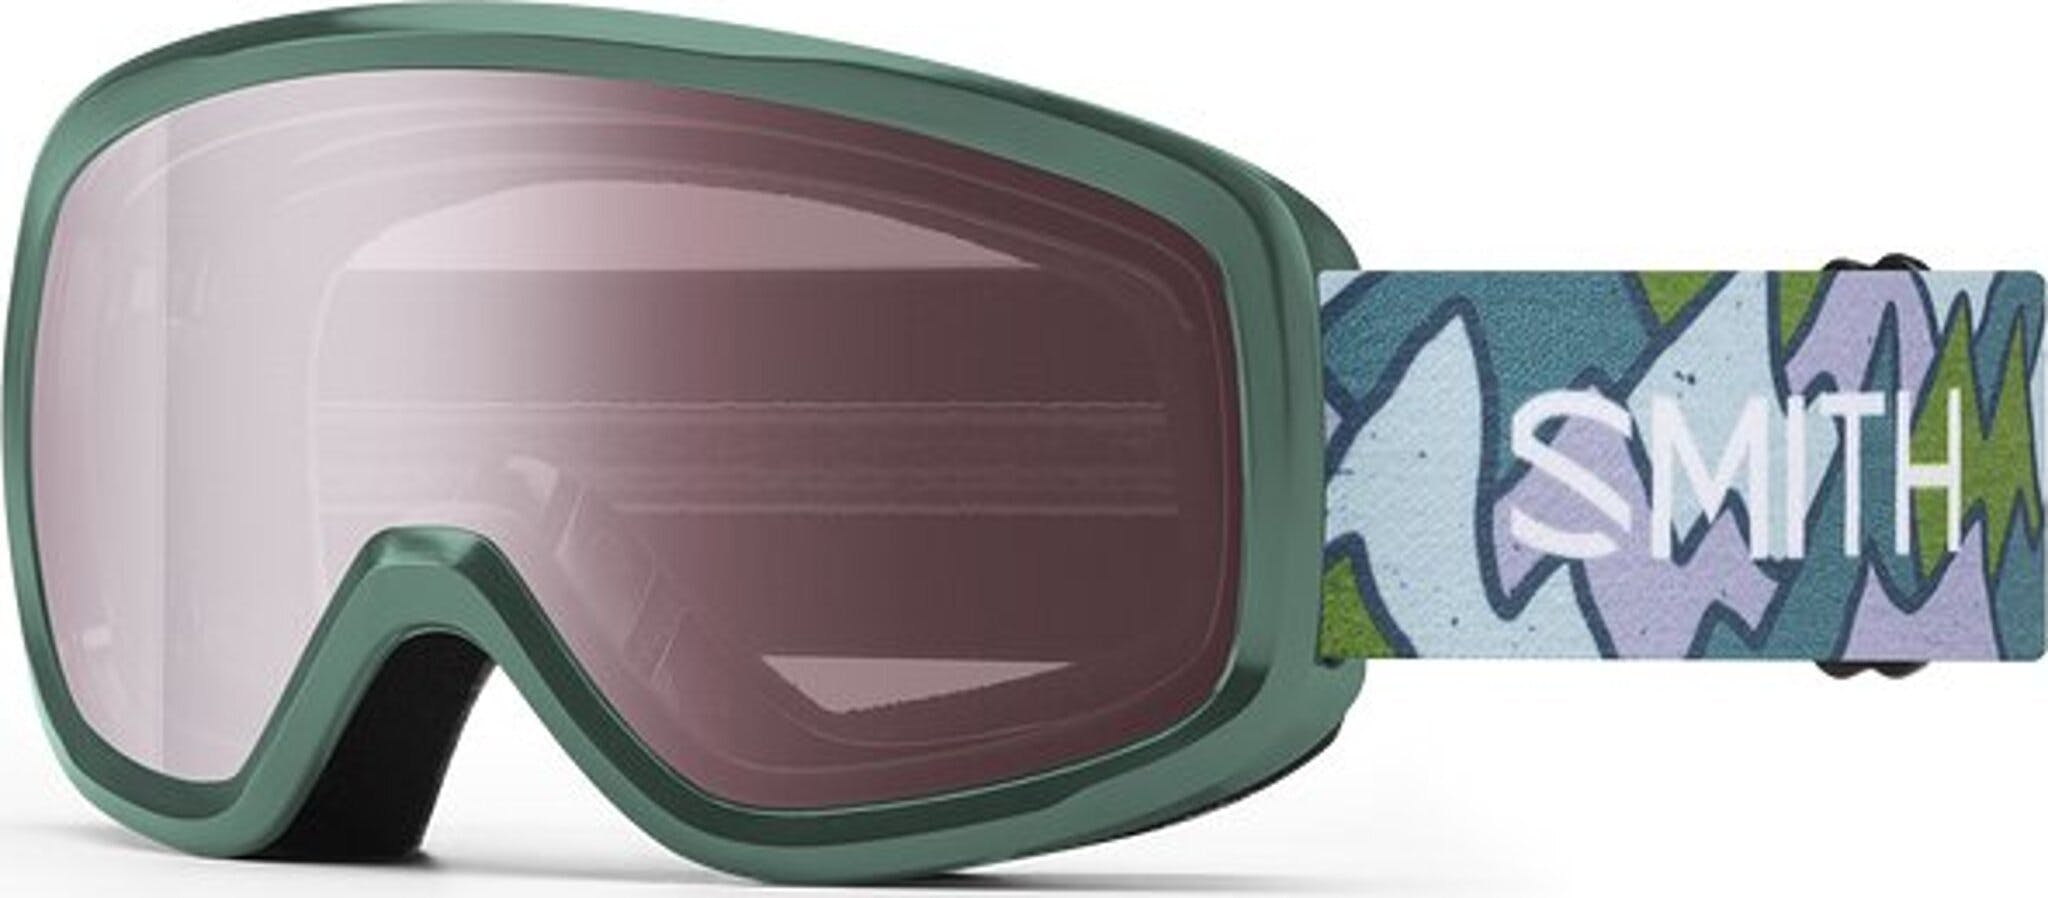 Product image for Snowday Goggles - Youth